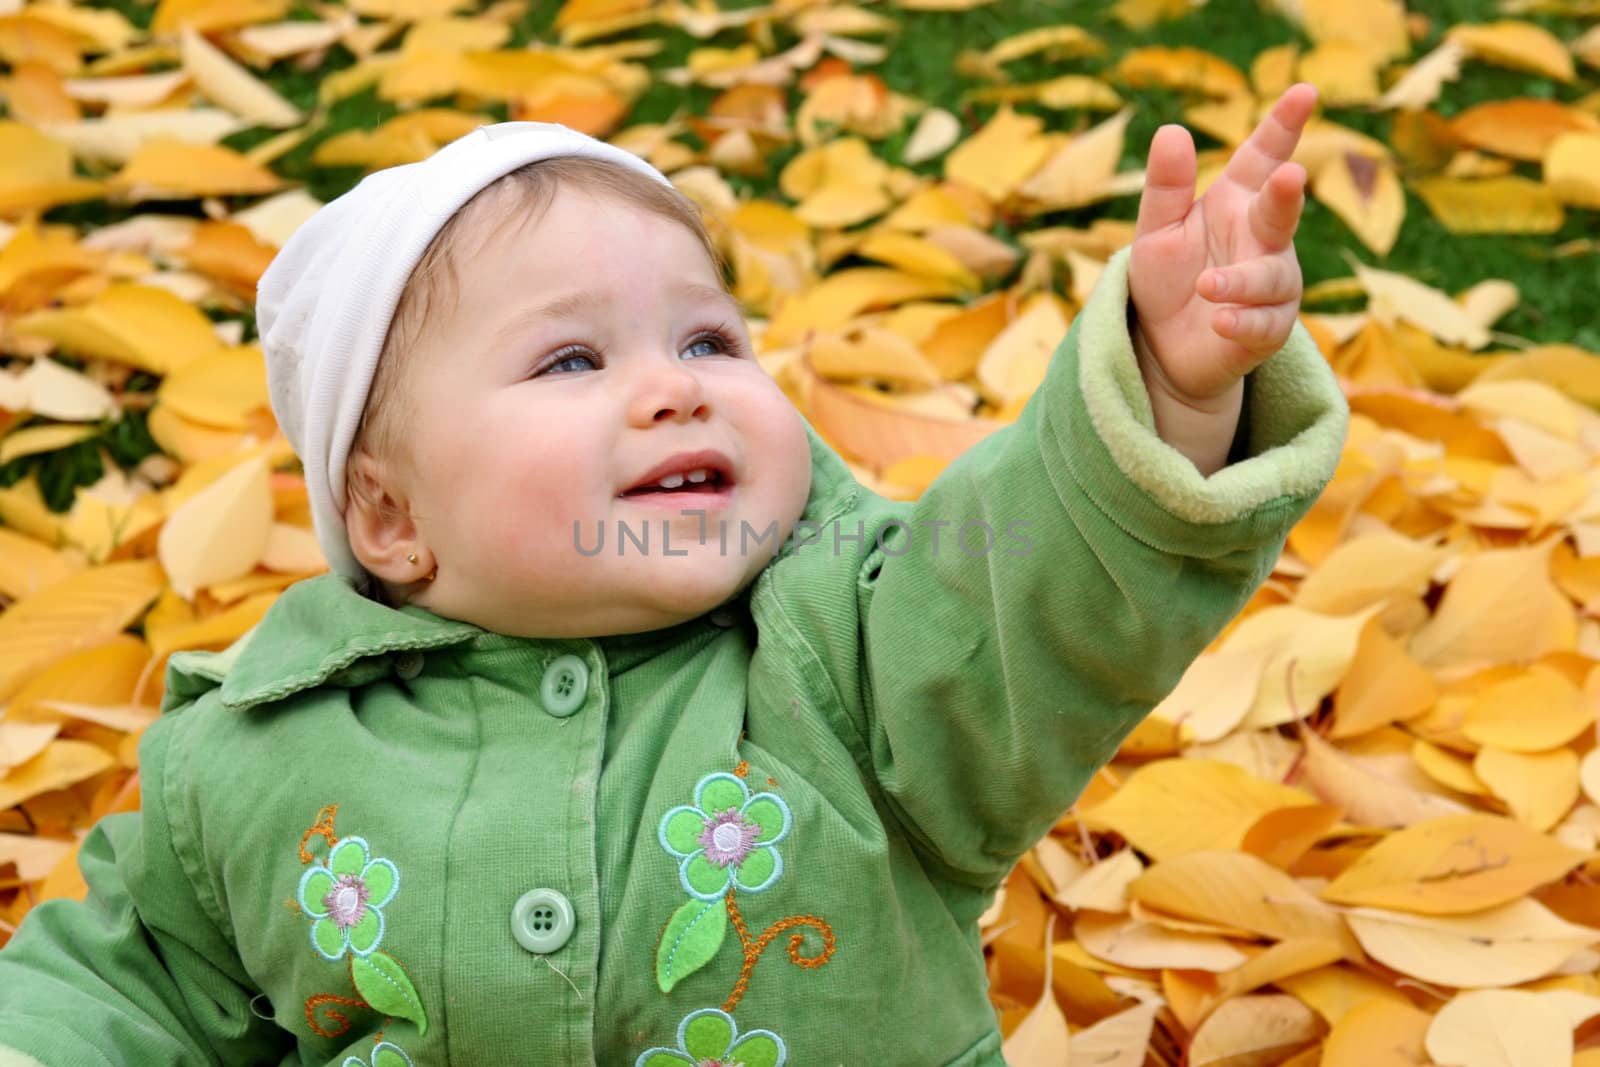 baby at a park in Autumn by vladacanon